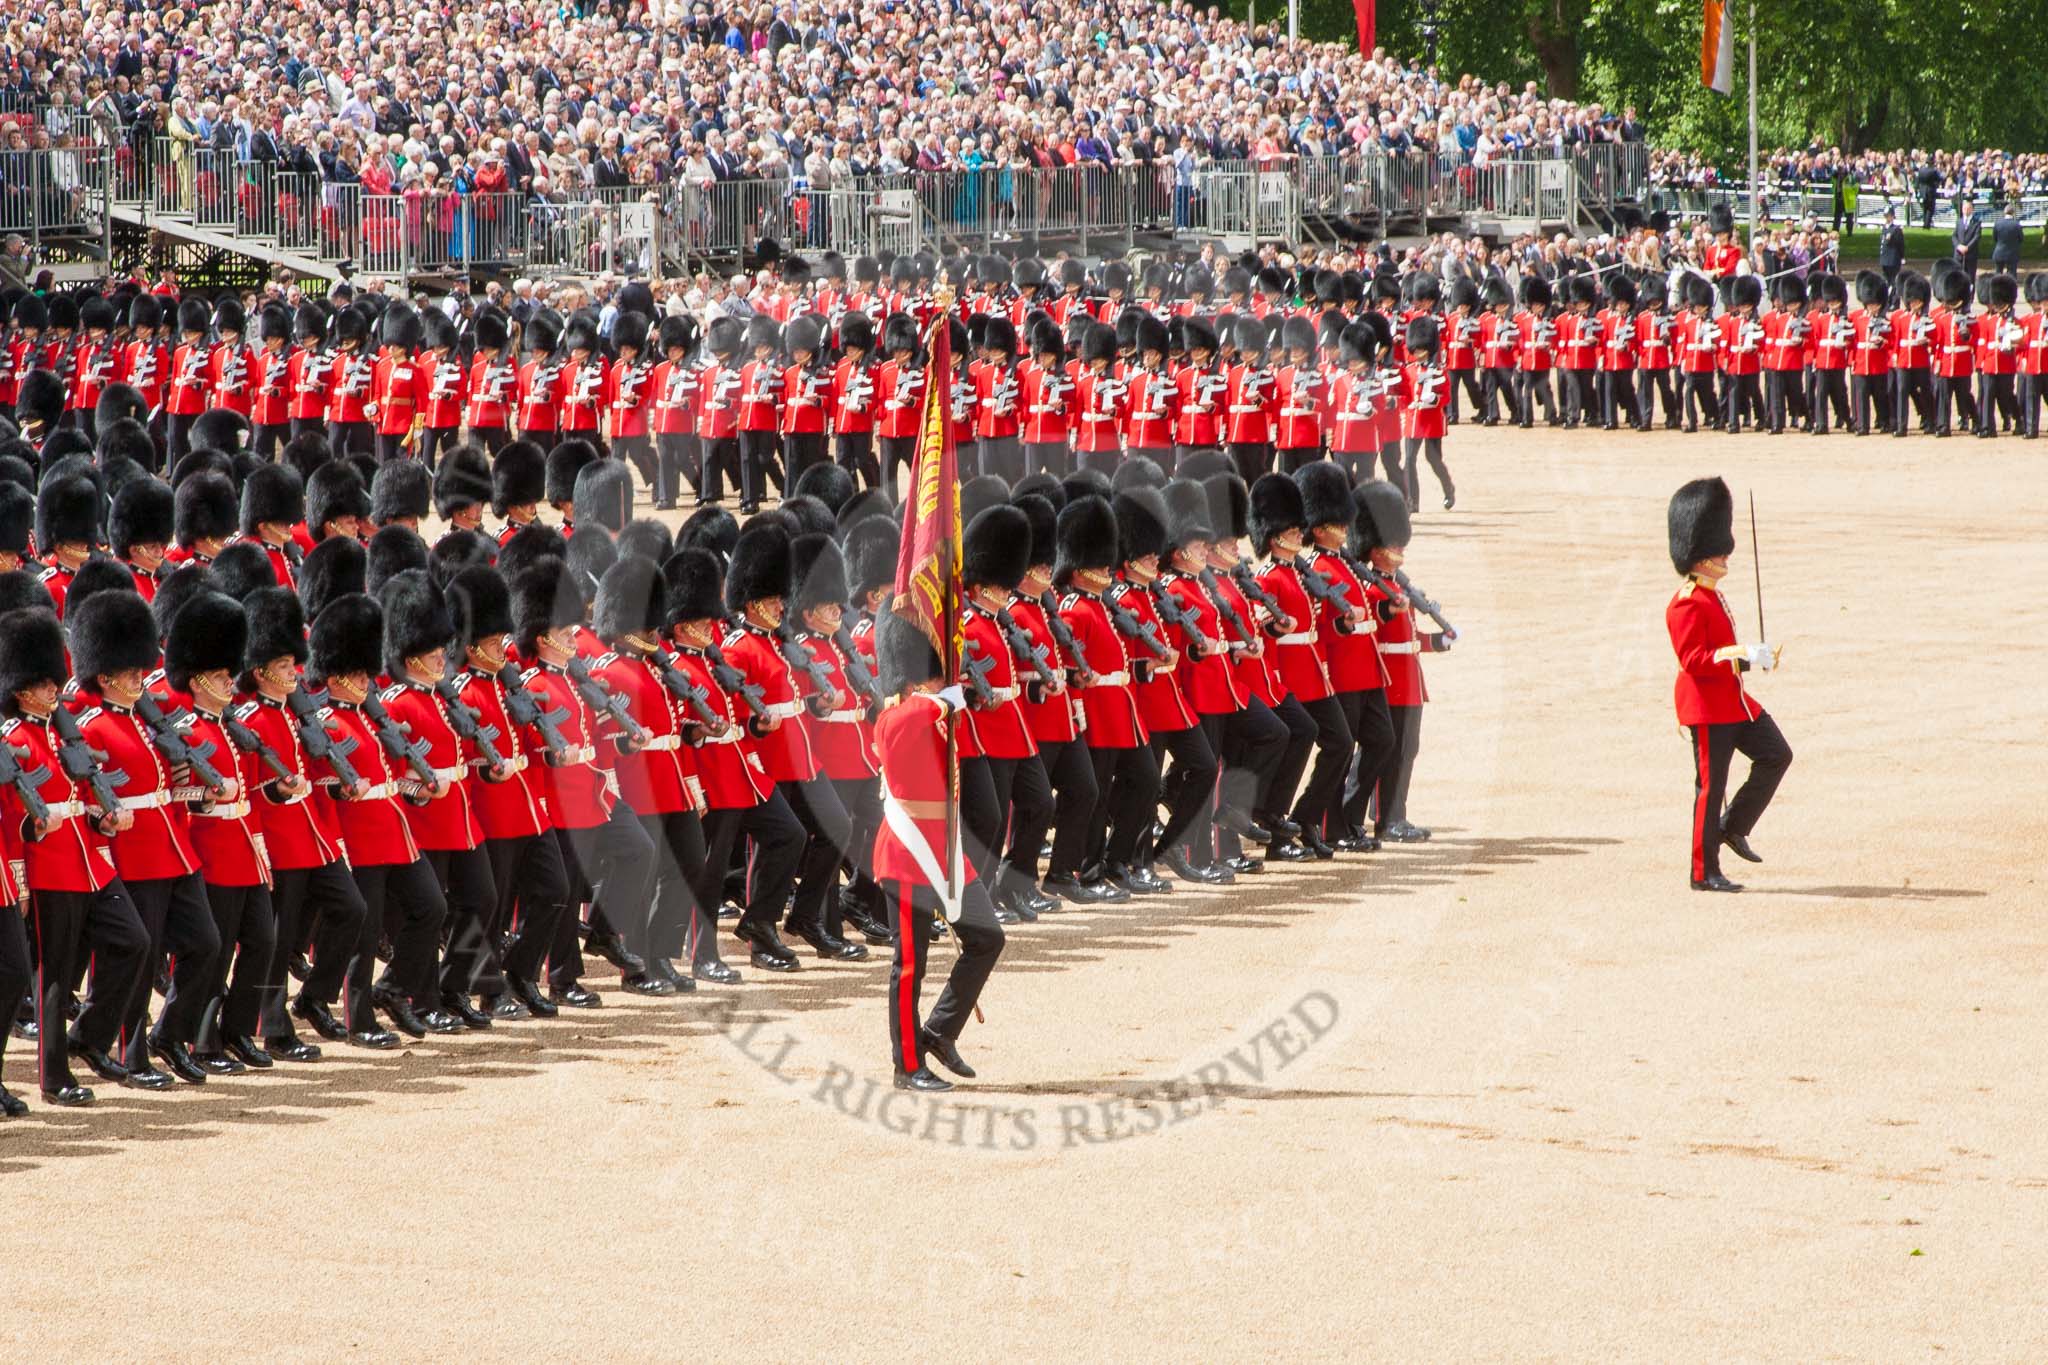 Trooping the Colour 2013: The March Past in Slow Time - the Ensign, Second Lieutenant Joel Dinwiddle, in front of No. 1 Guard, the Escort to the Colour. Image #537, 15 June 2013 11:35 Horse Guards Parade, London, UK